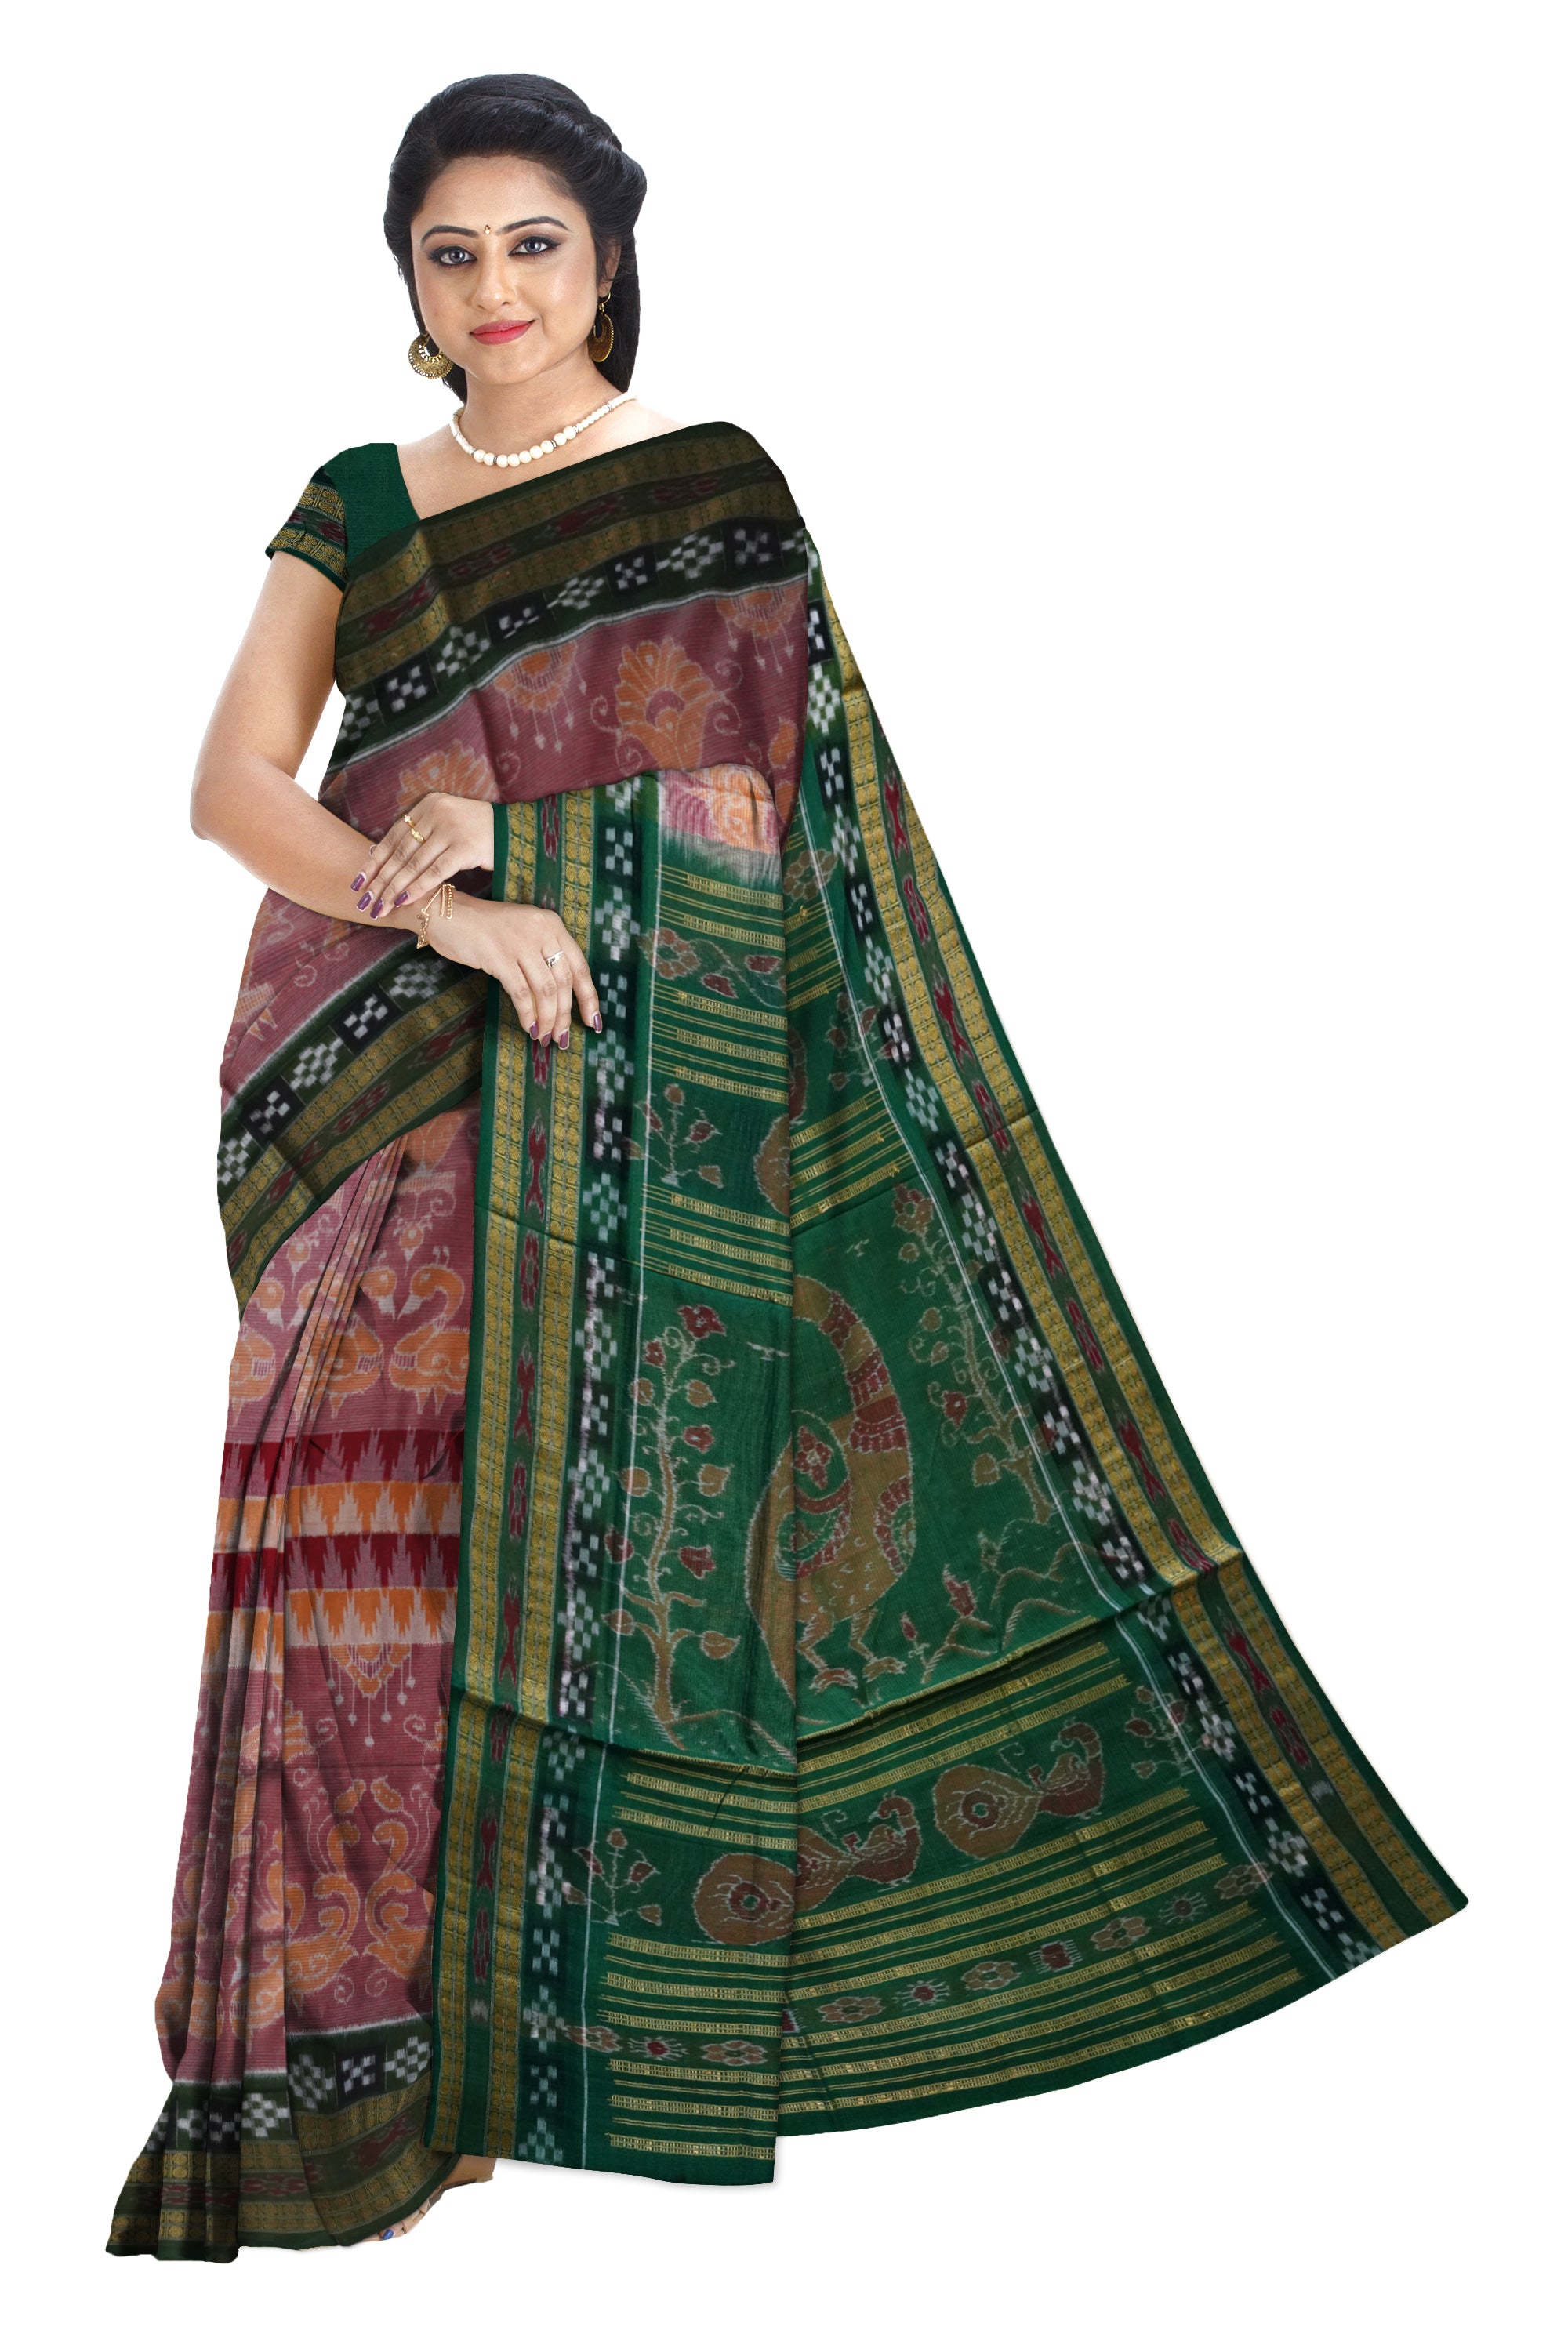 Peacock with pasapali pattern pure cotton saree is baby pink and green color base. - Koshali Arts & Crafts Enterprise